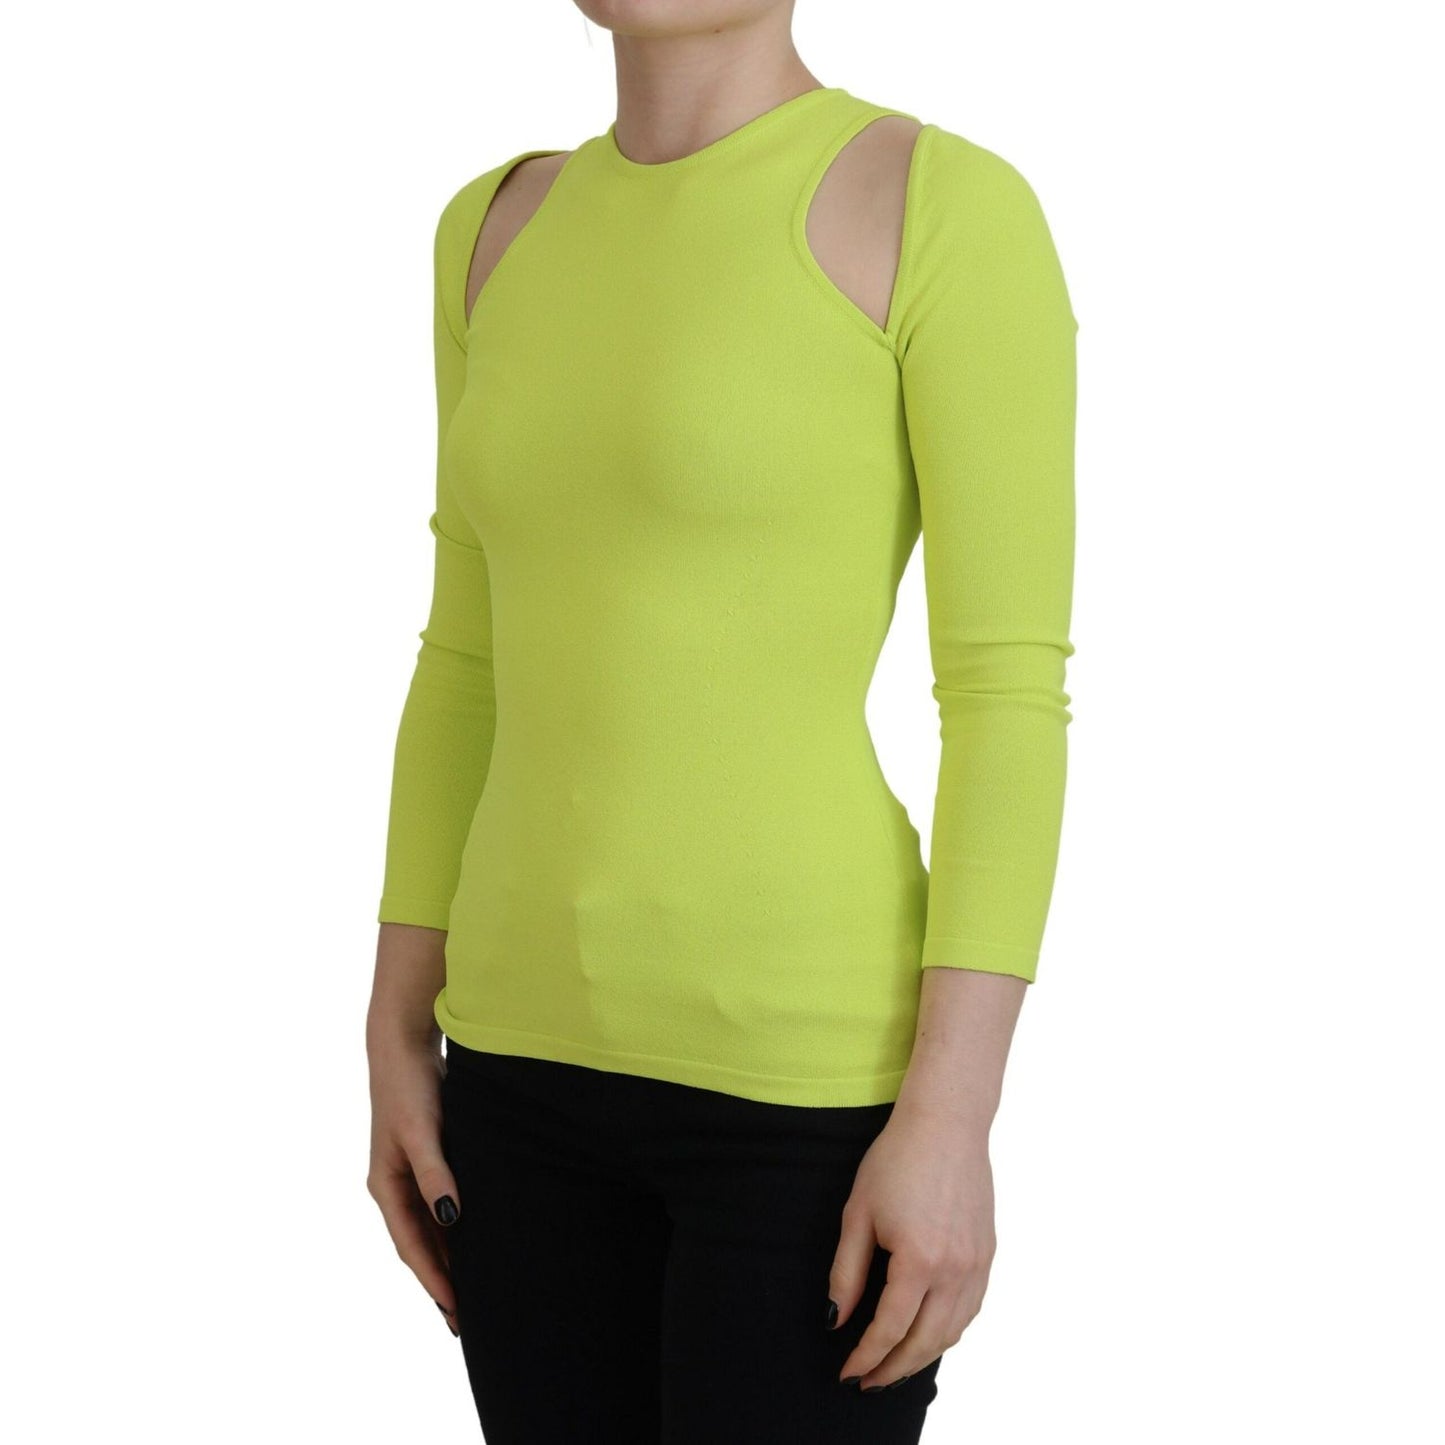 Dsquared² Yellow Green Viscose Open Shoulder Long Sleeves Top yellow-green-viscose-open-shoulder-long-sleeves-top